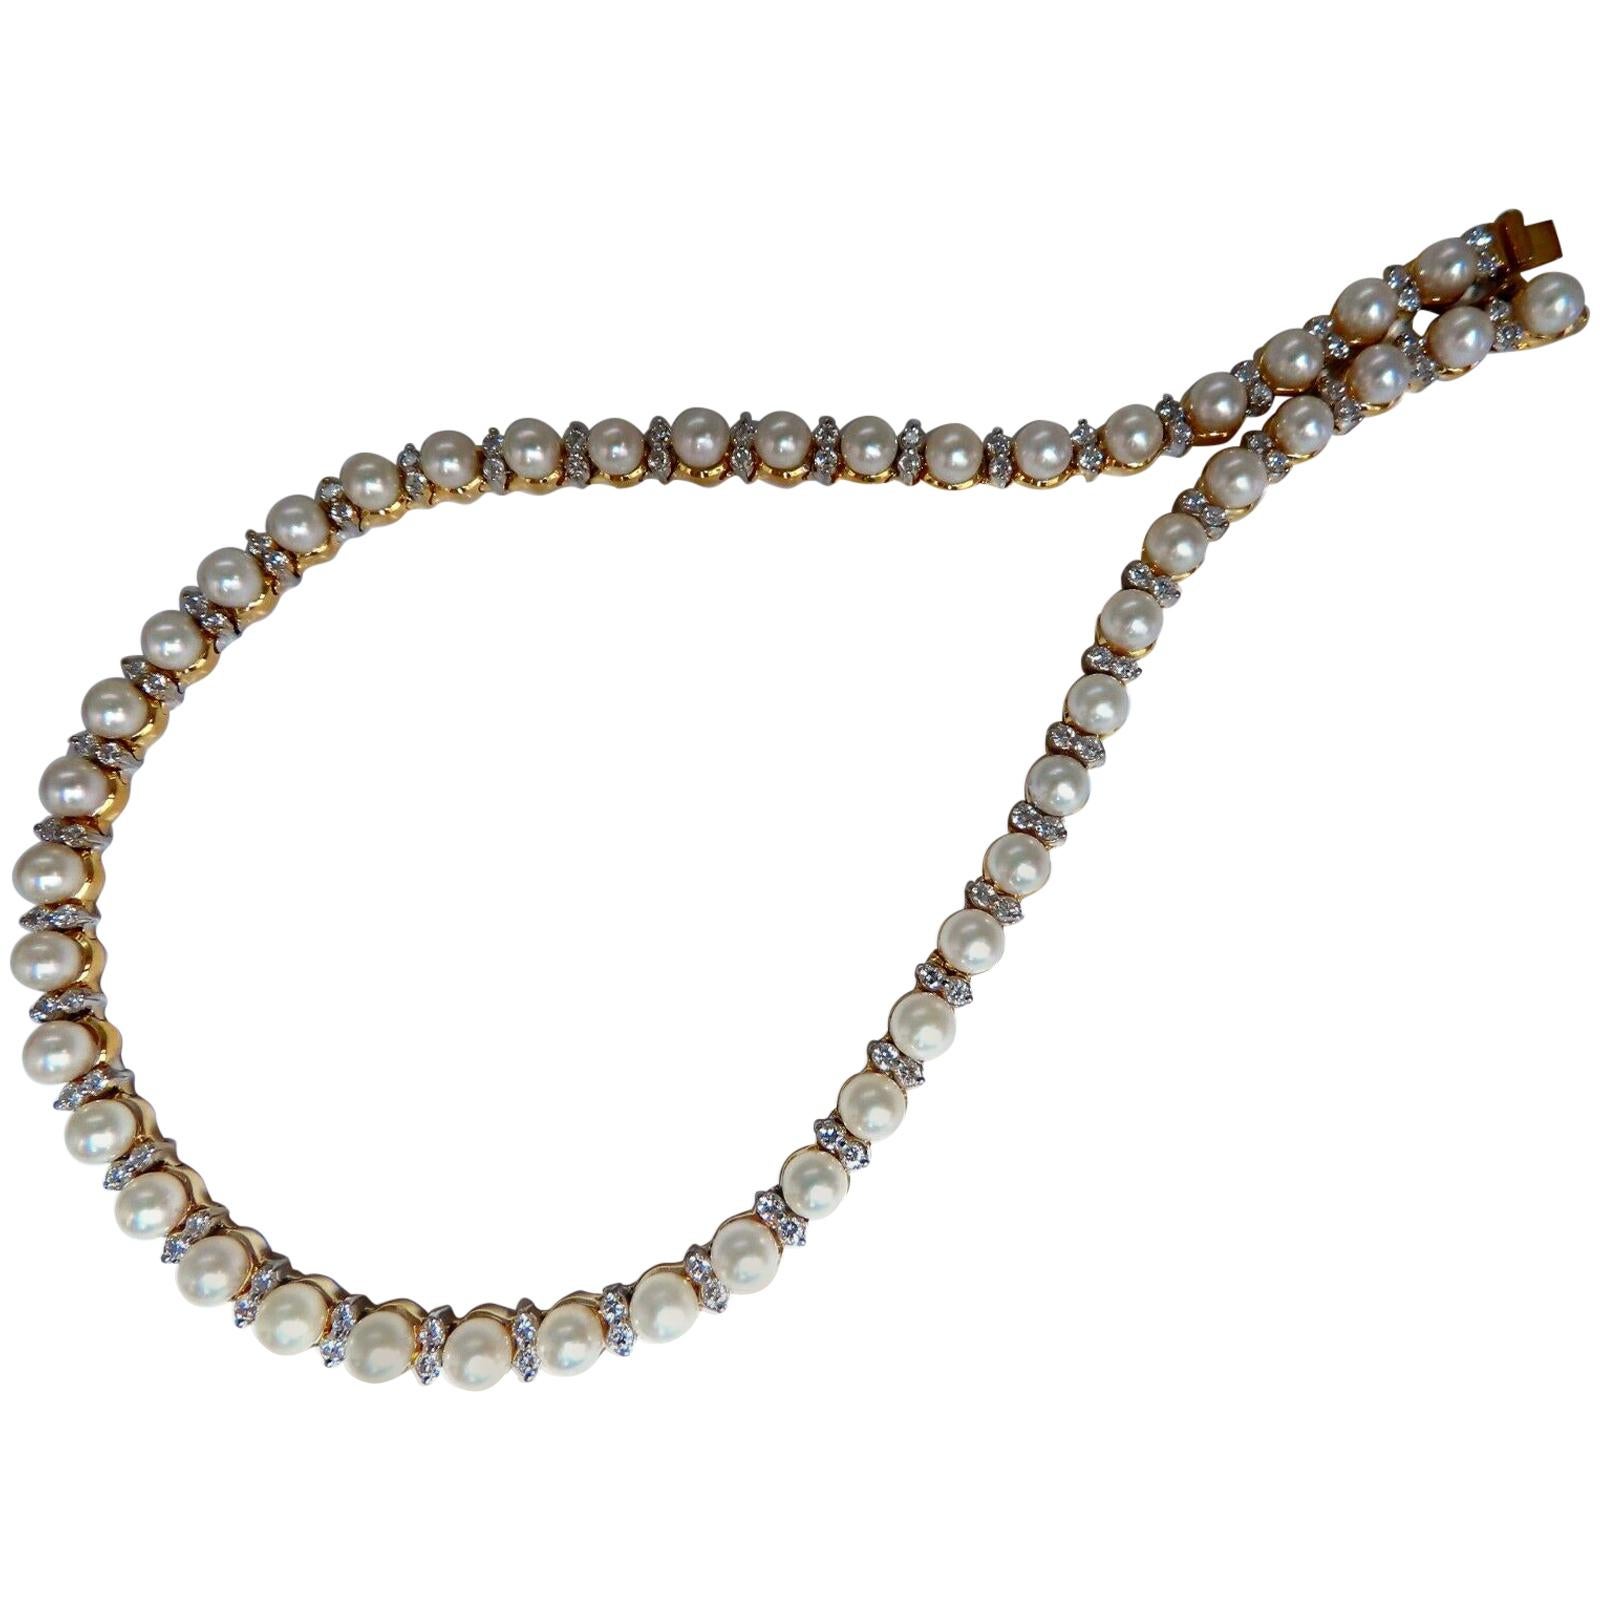 3.03 Carat Natural Akoya Pearls and Diamonds Riviera Necklace 14 Karat Gold For Sale